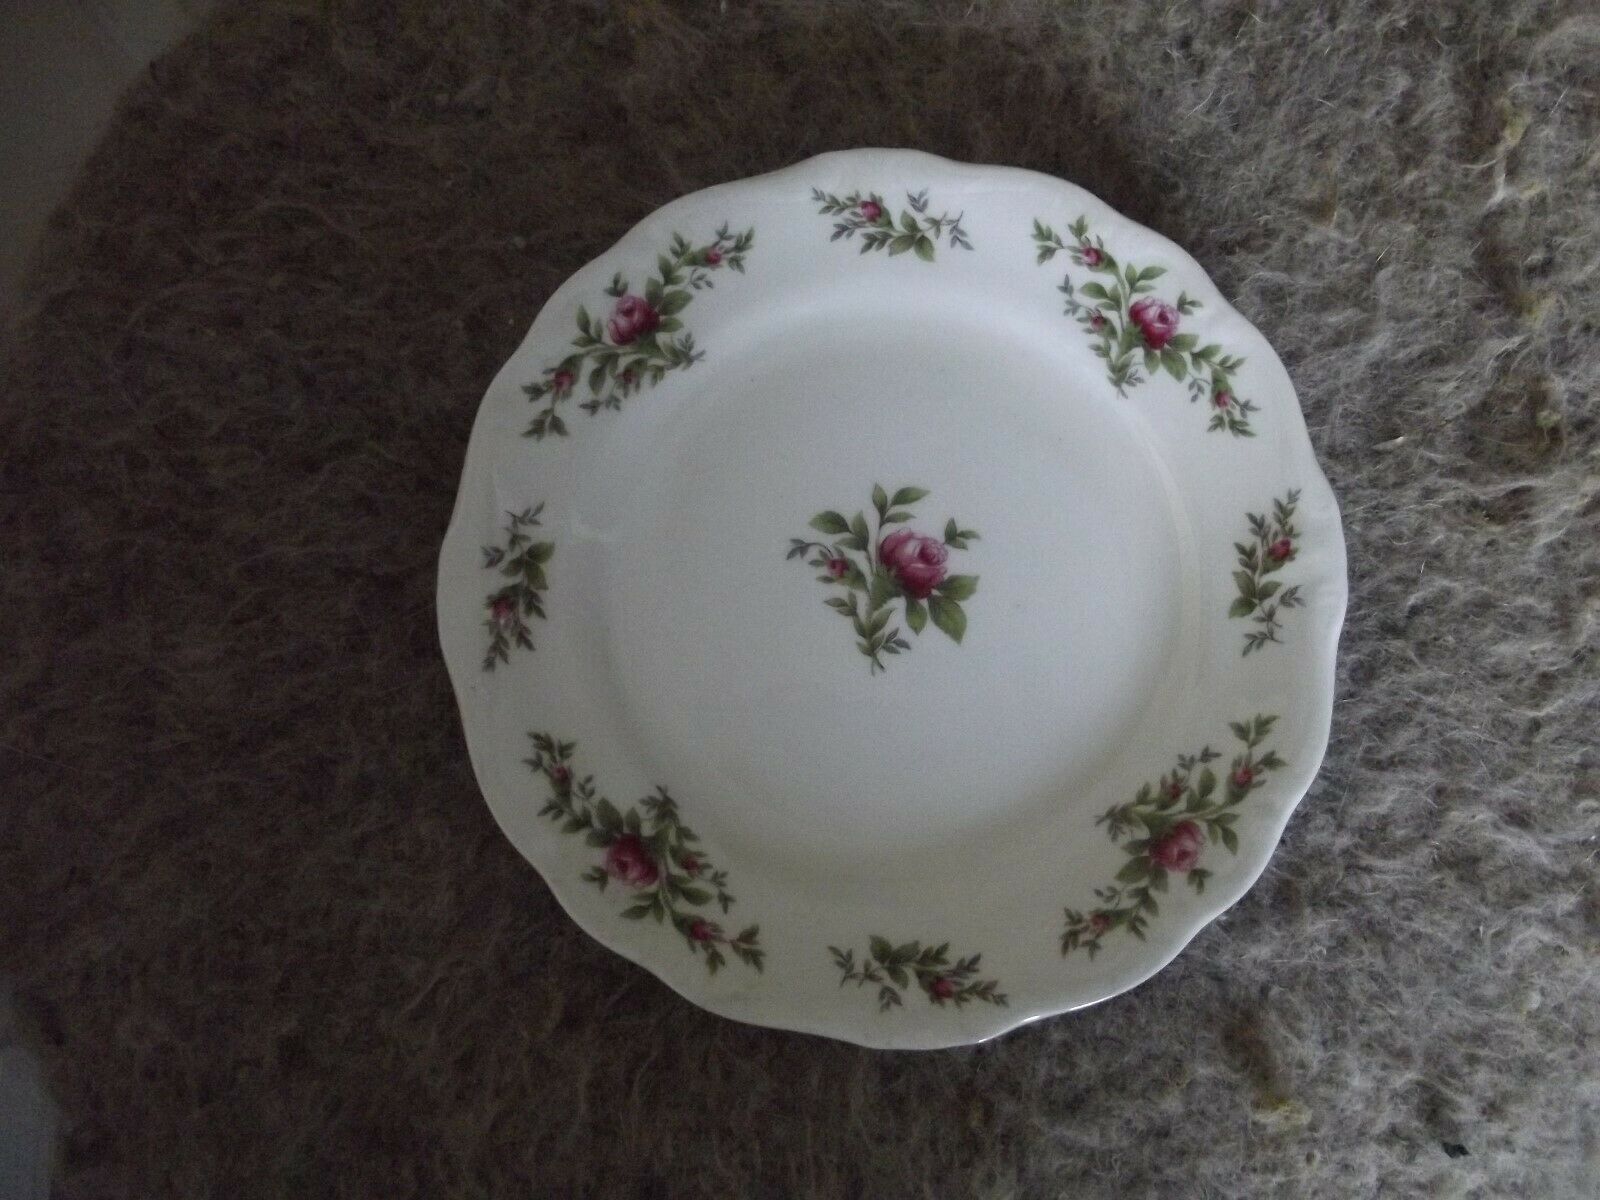 Primary image for Johann Haviland-TraditionsThailand Moss Rose bread plate 4 available